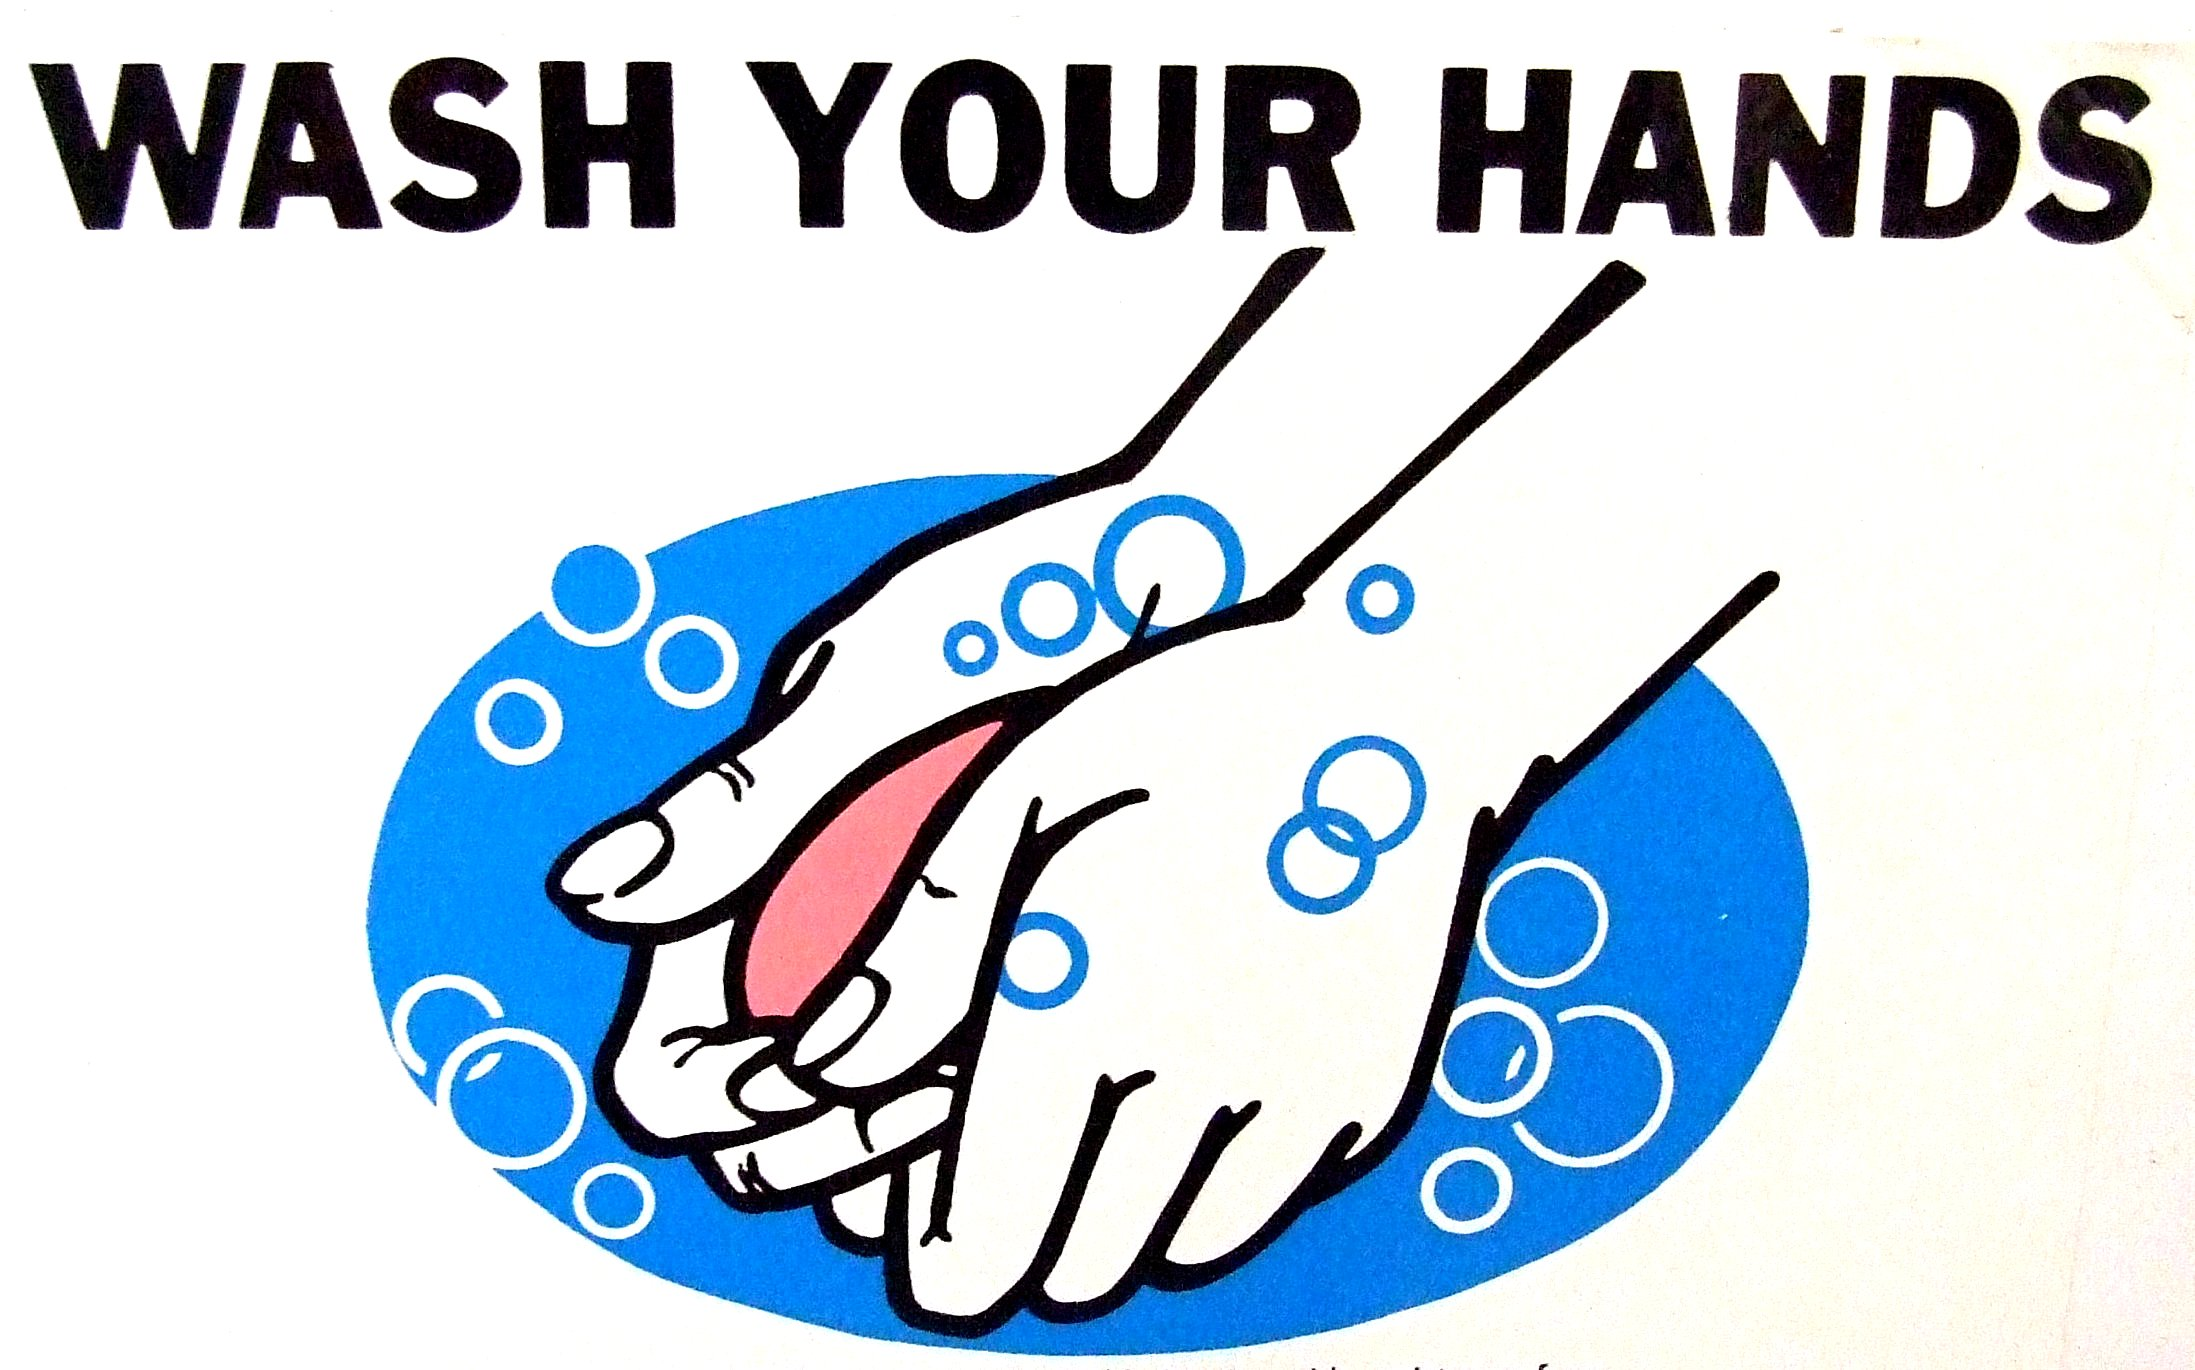 Have you washed your hands. Wash your hands. Картинка Wash your hands. Wash your hands картинка для детей. Wash your hands Flashcards.